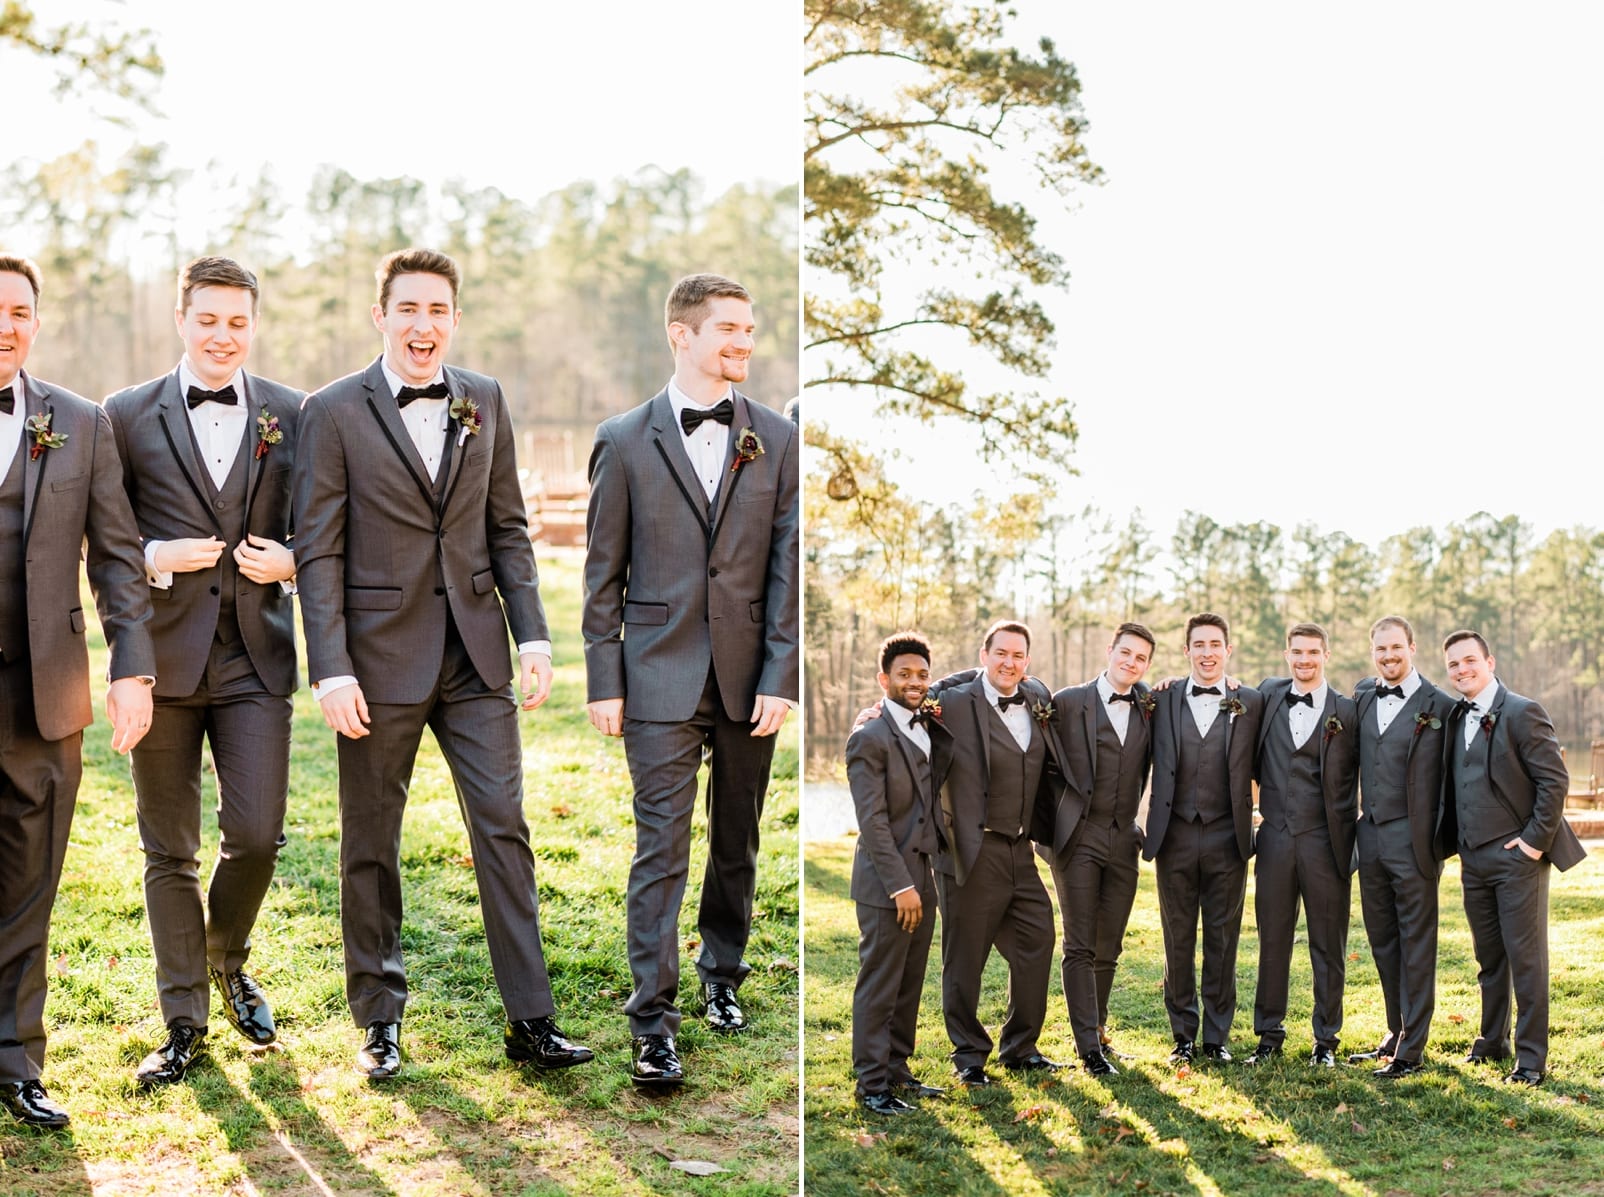 Angus Barn groom with his groomsmen in black tuxedos from Generation Tux photo